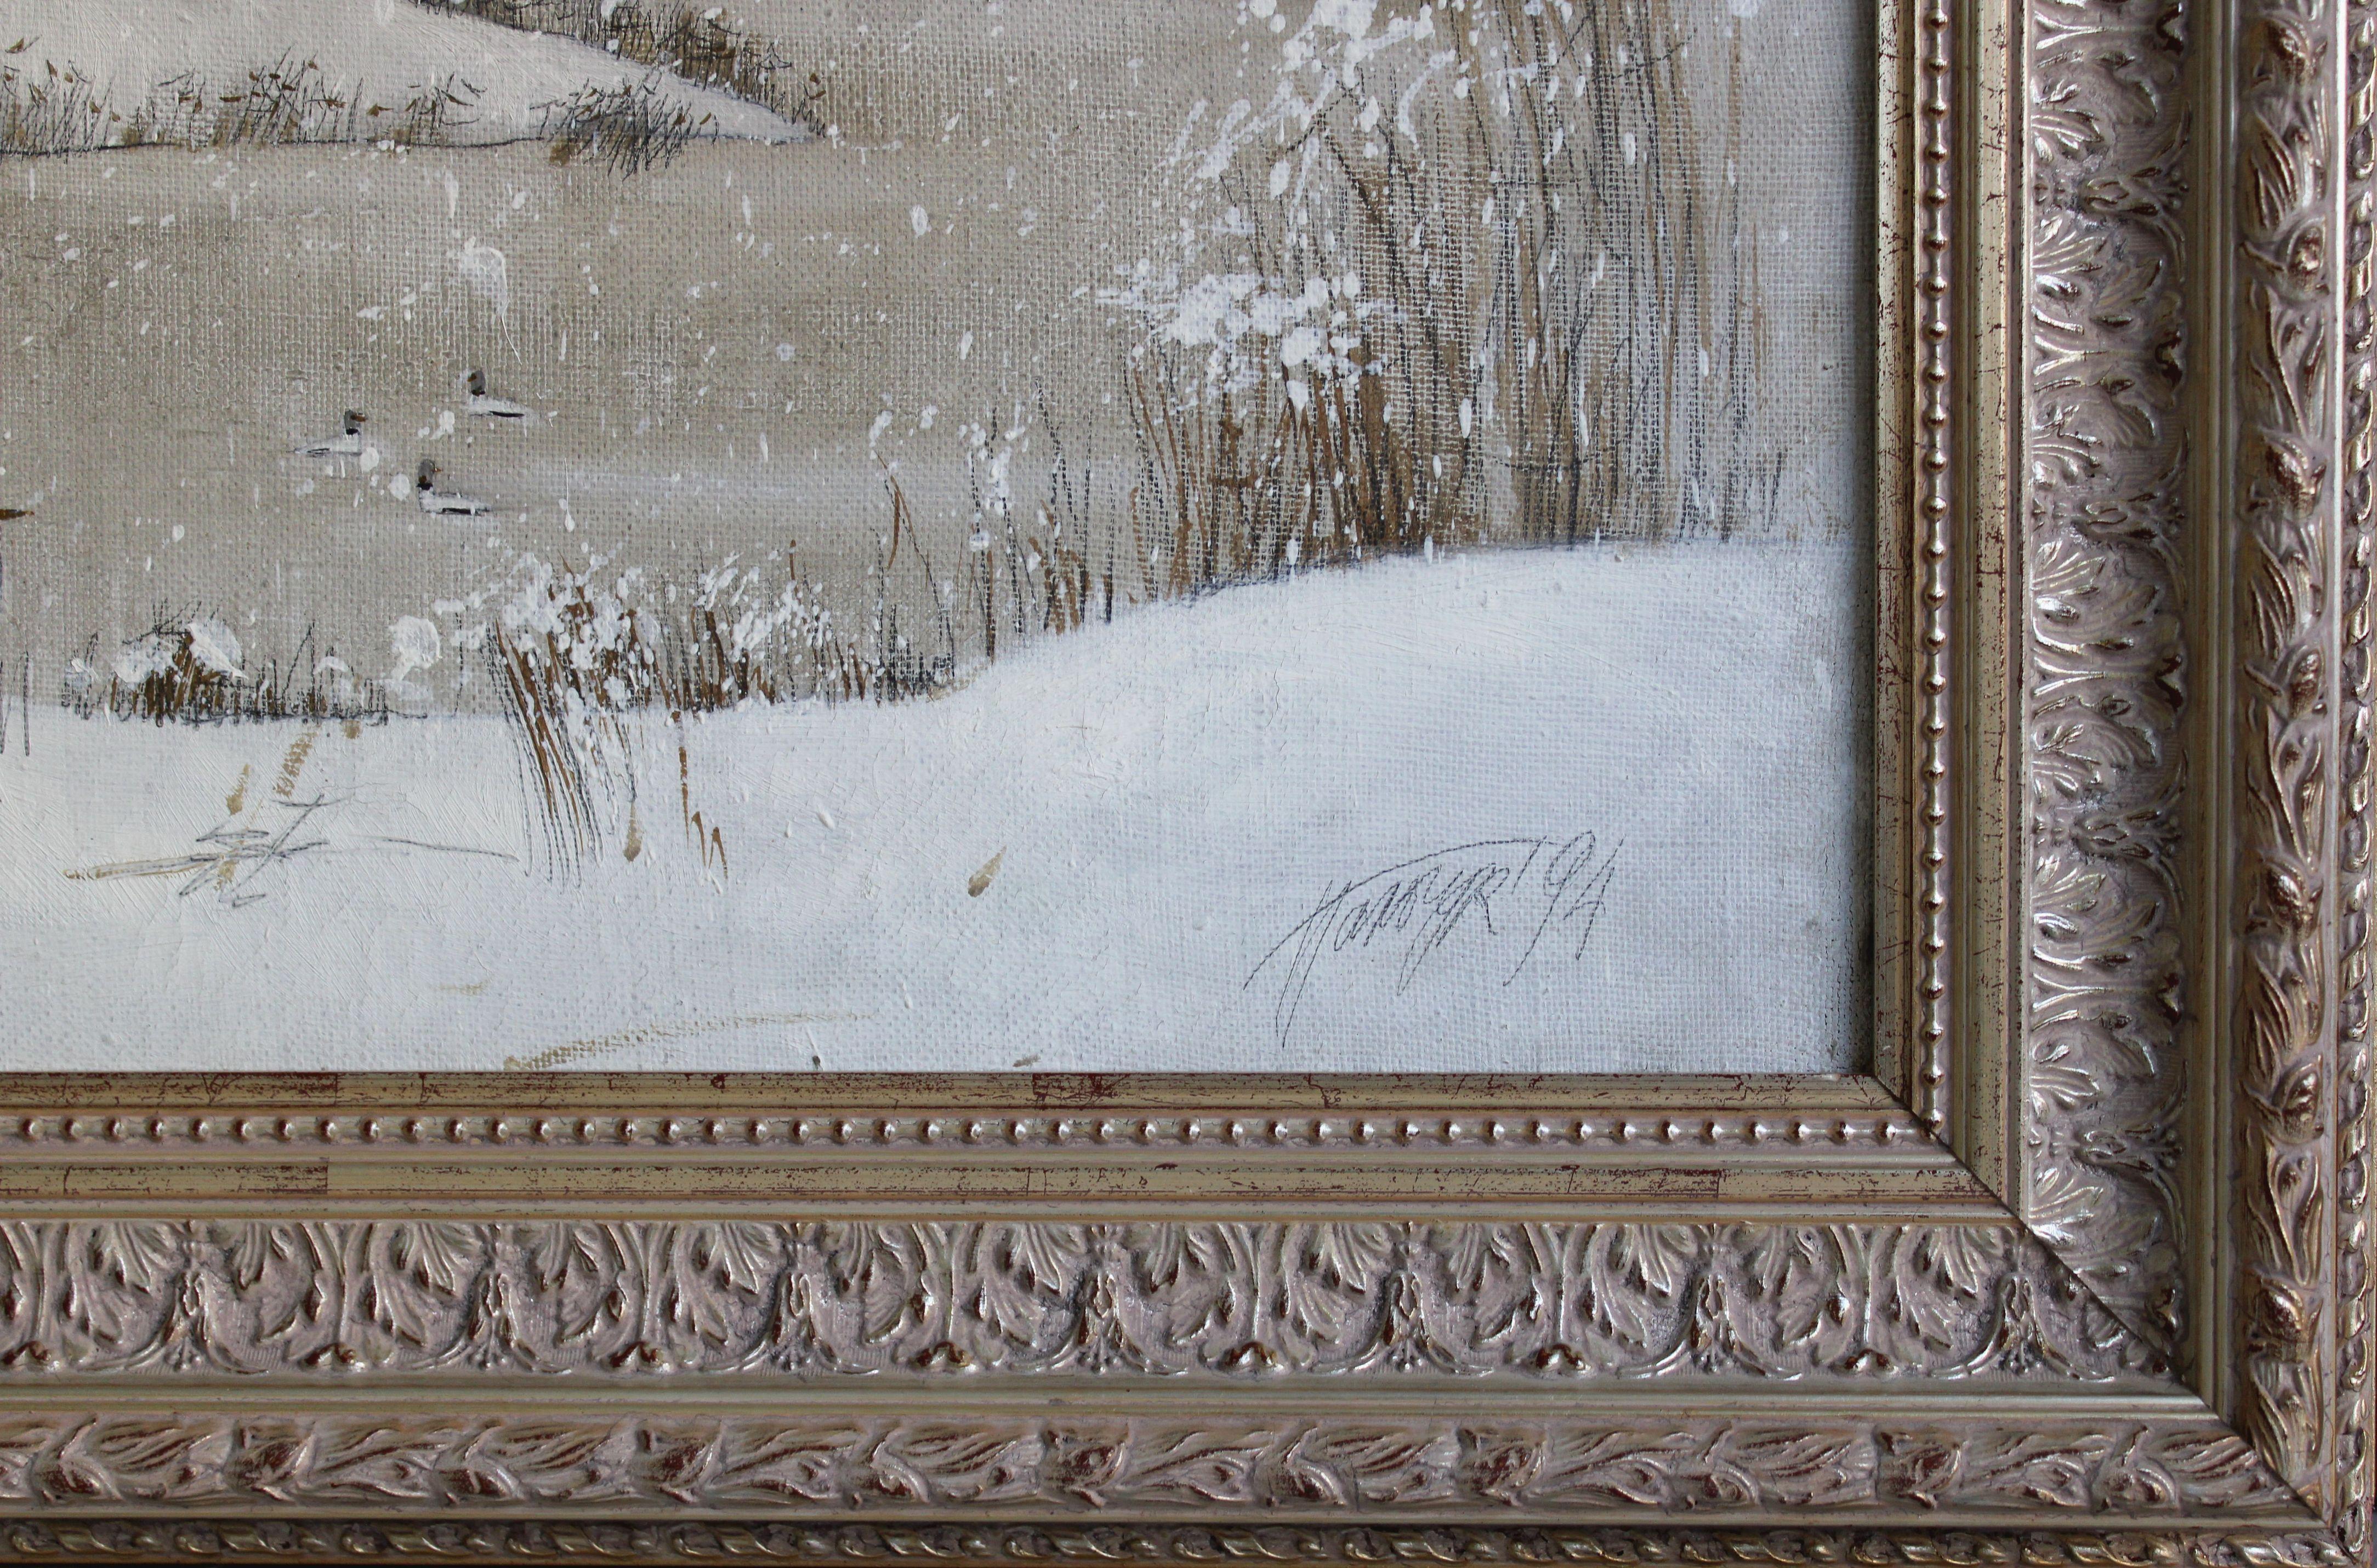 Seagulls in the snow. 1994. Canvas, oil, 70x112 cm - Romantic Painting by Tatyana Palchuk